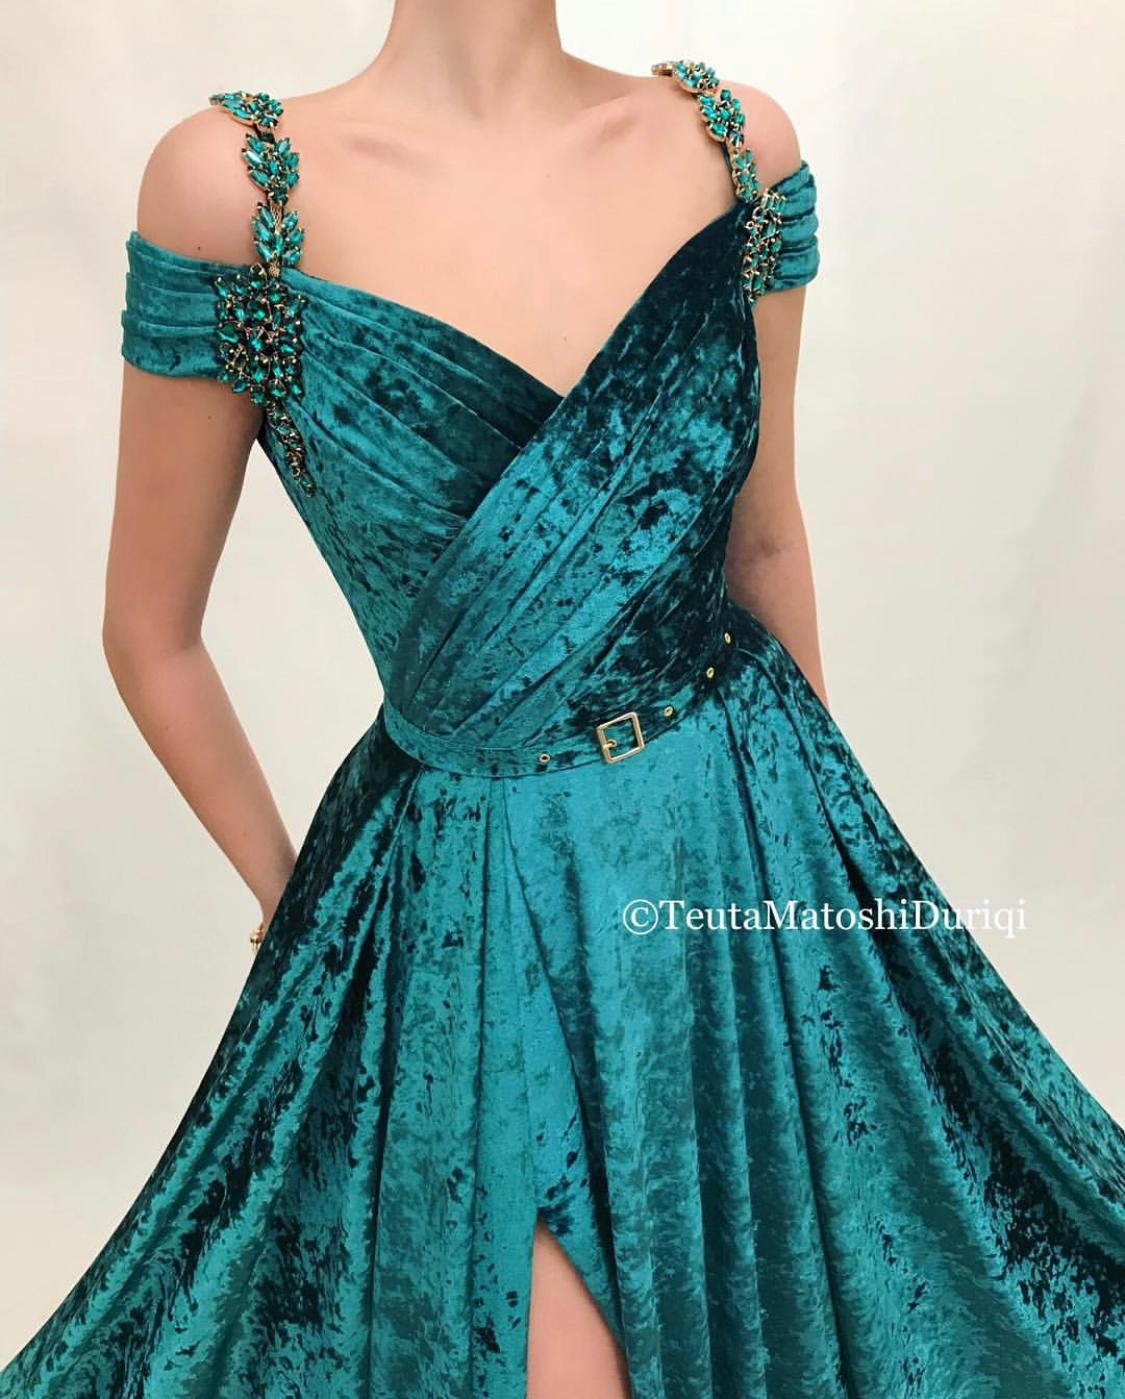 Green A-Line dress with spaghetti straps, off the shoulder sleeves and embroidery